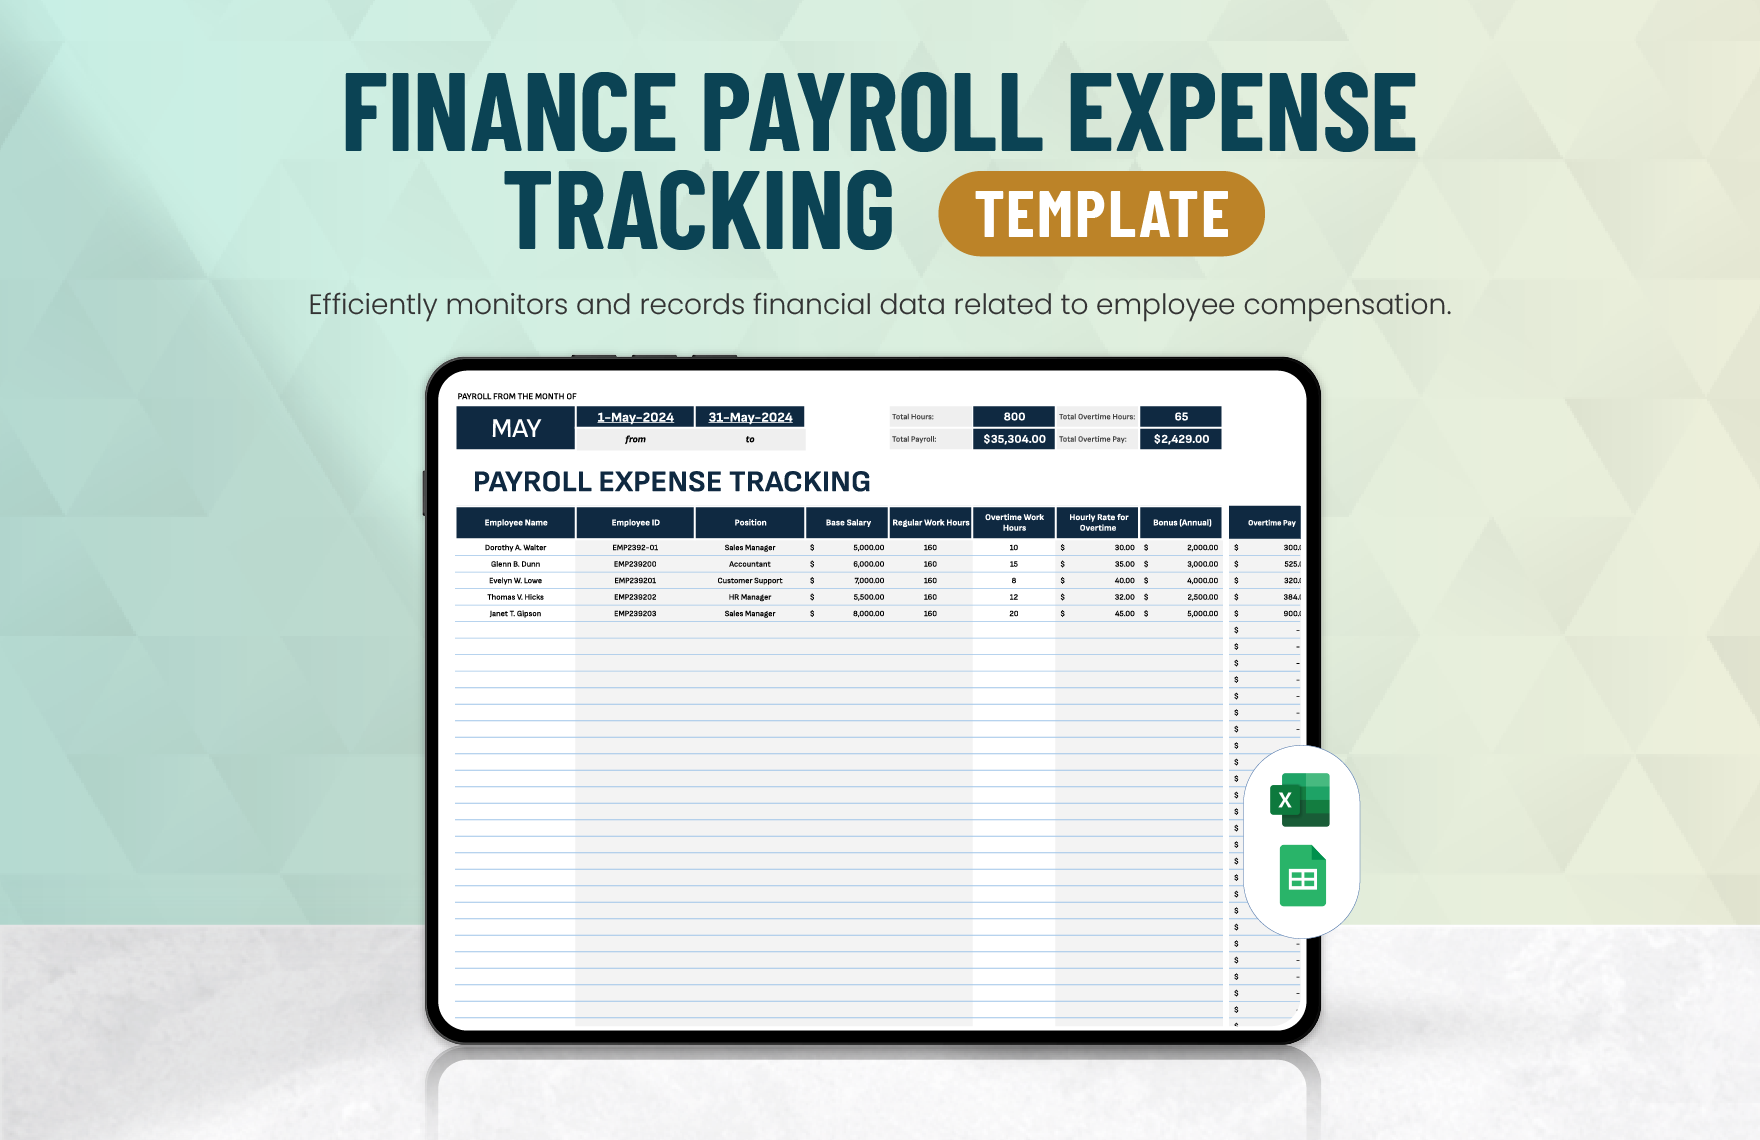 Finance Payroll Expense Tracking Template in Excel, Google Sheets